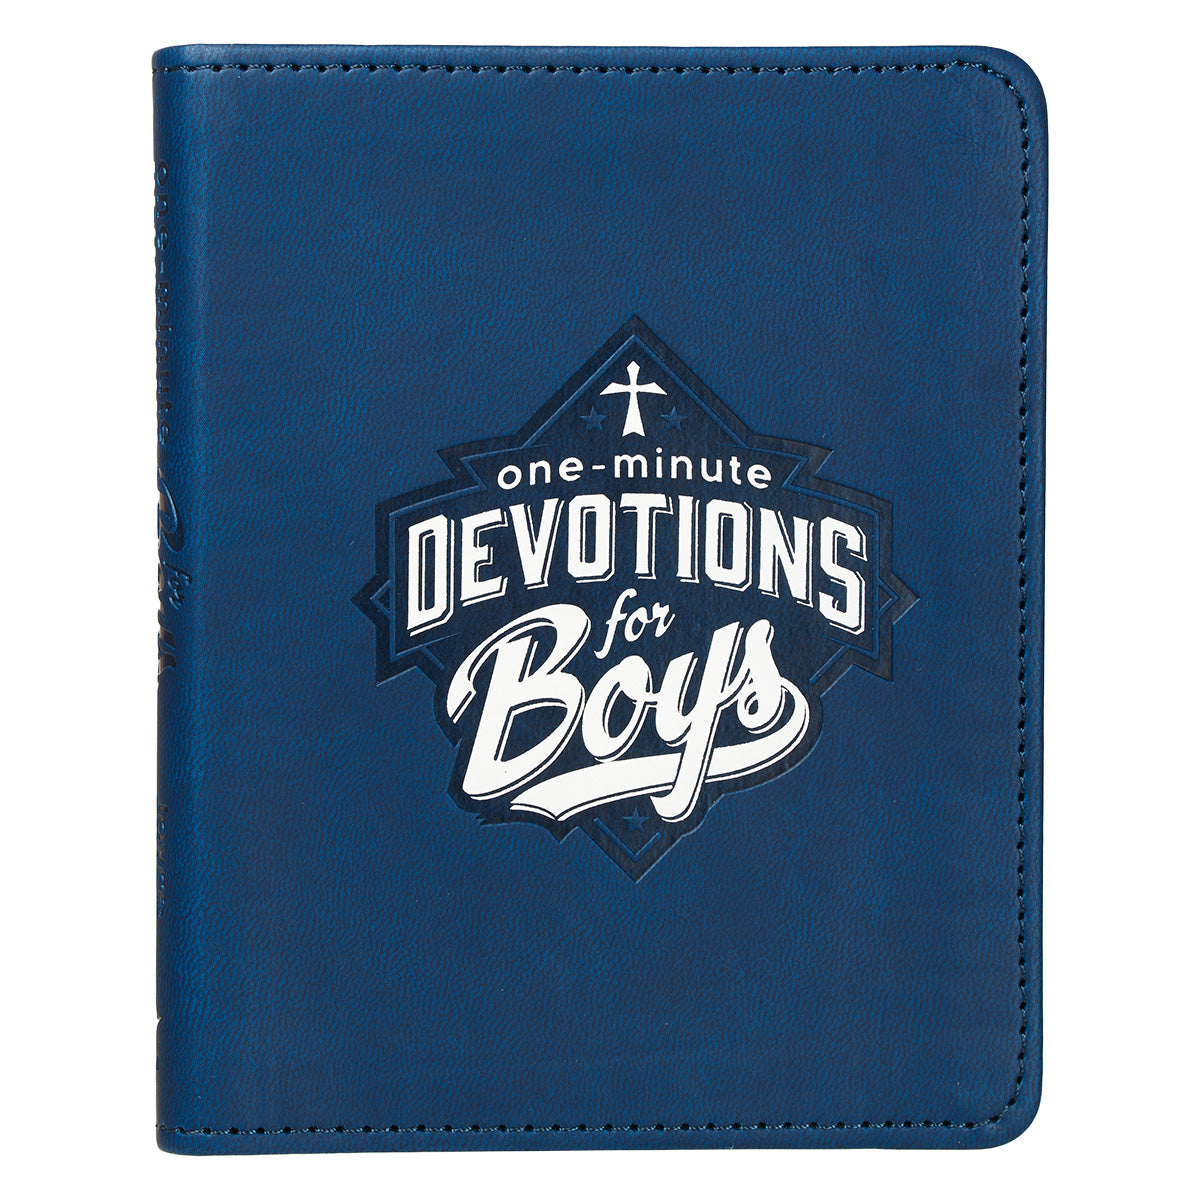 One-Minute Devotions for Boys Blue Faux Leather Devotional - The Christian Gift Company